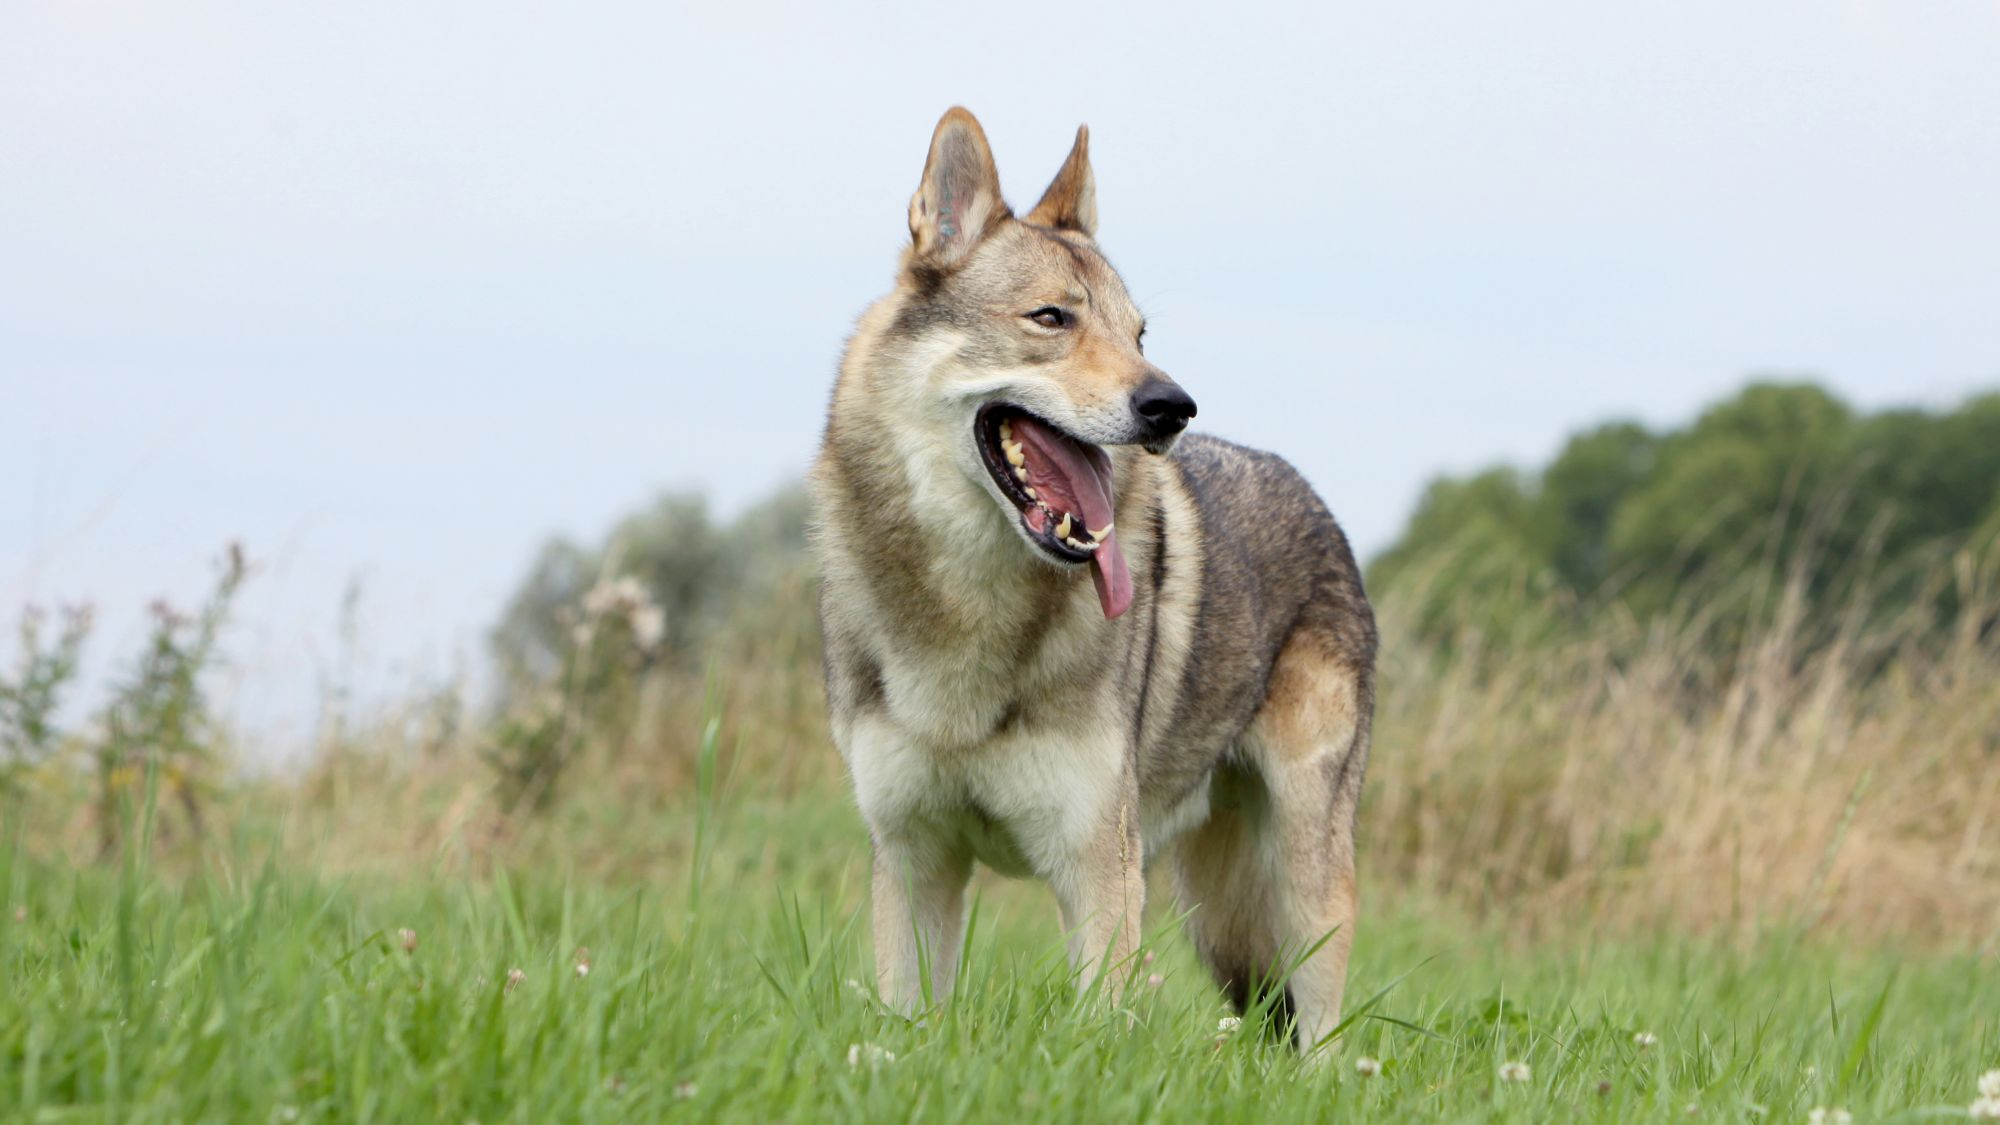 Czechoslovakian Wolfdog stood in long grass looking to the side with its tongue out